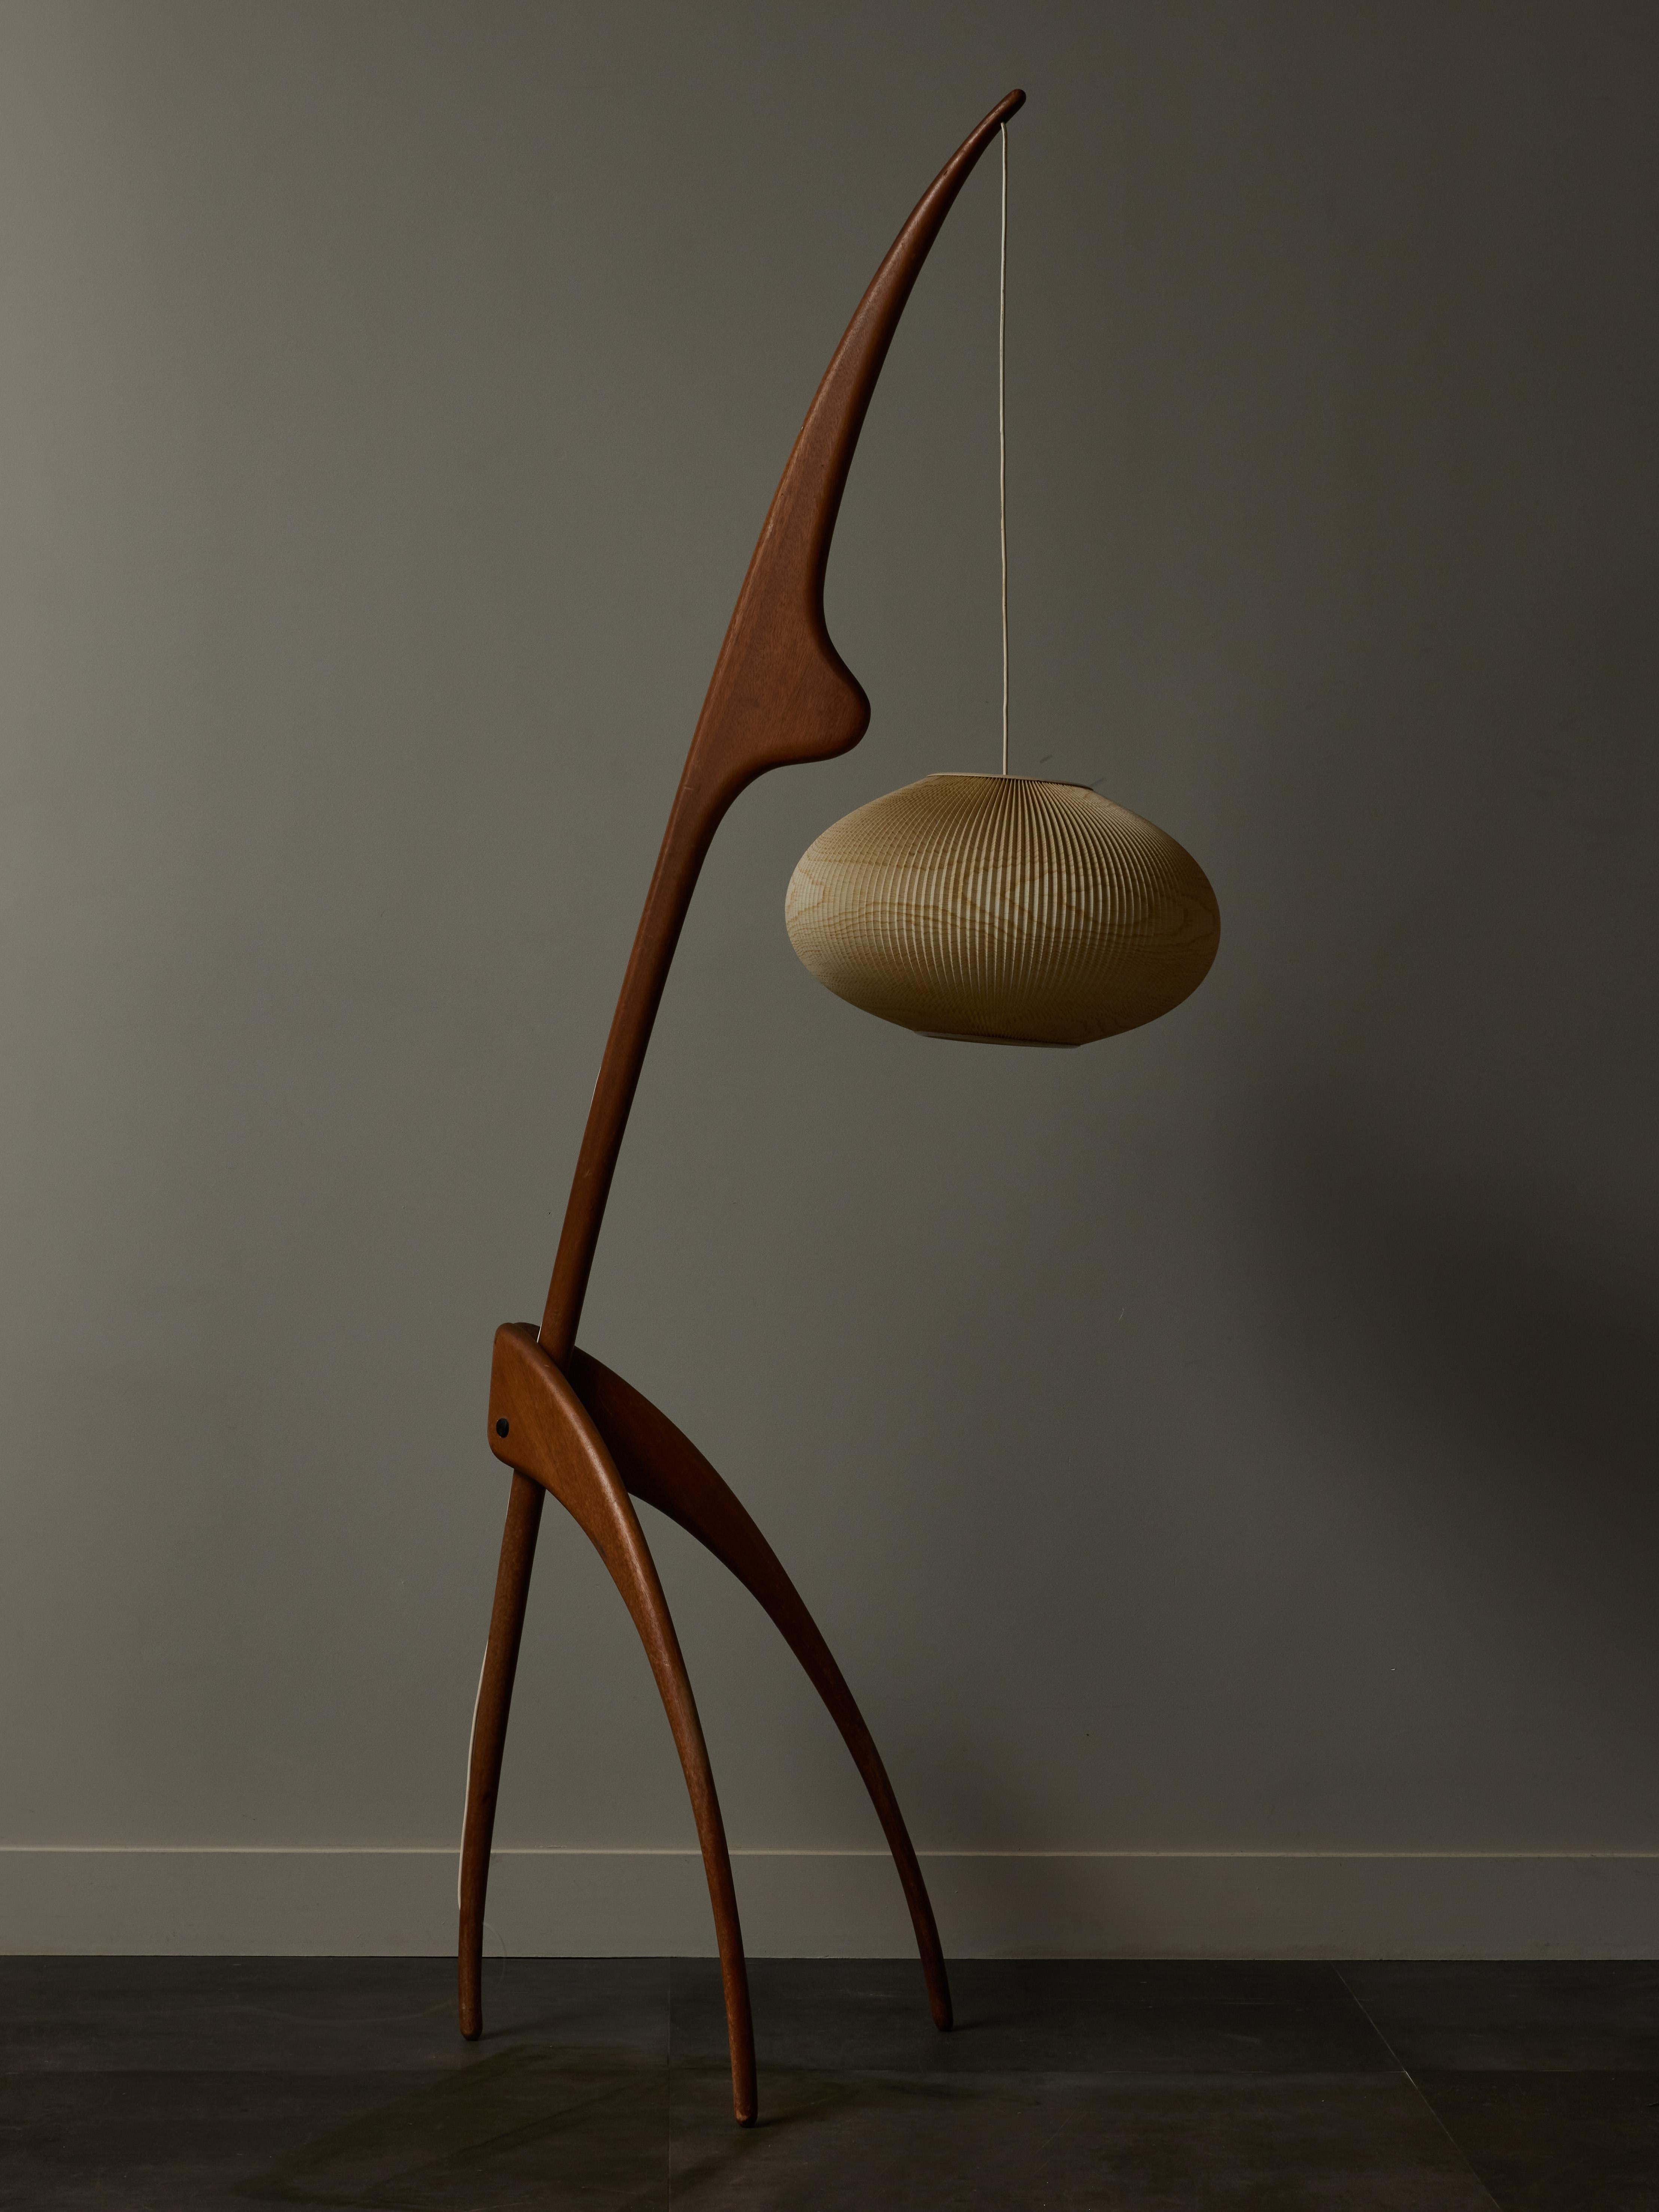 Mante Religieuse (praying mantis) floor lamp designed and produced by Jean Rispal in the 1950s, made of wood and a hanging cellulose acetate lampshade.

The lighting manufacturer RISPAL was a French lighting brand based in Paris and active from the